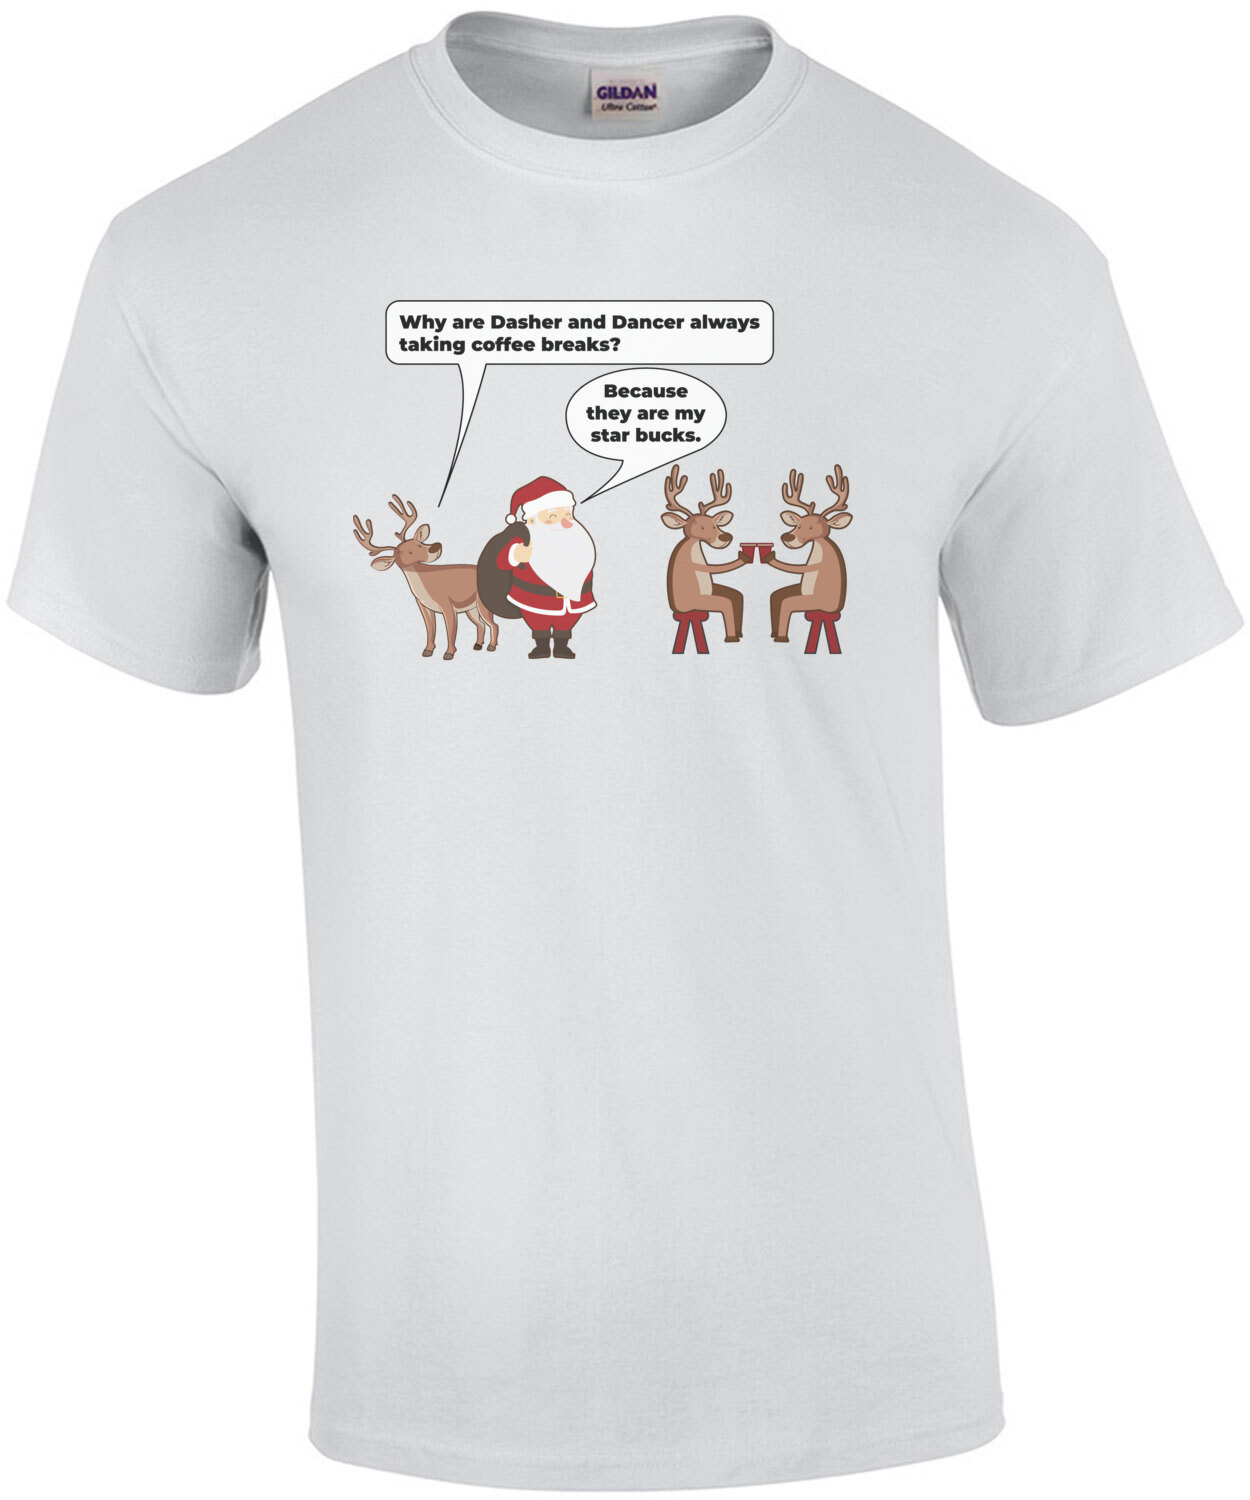 Why are Dasher and Dancer always taking coffee breaks? - Because they are my star bucks. Funny Christmas T-Shirt